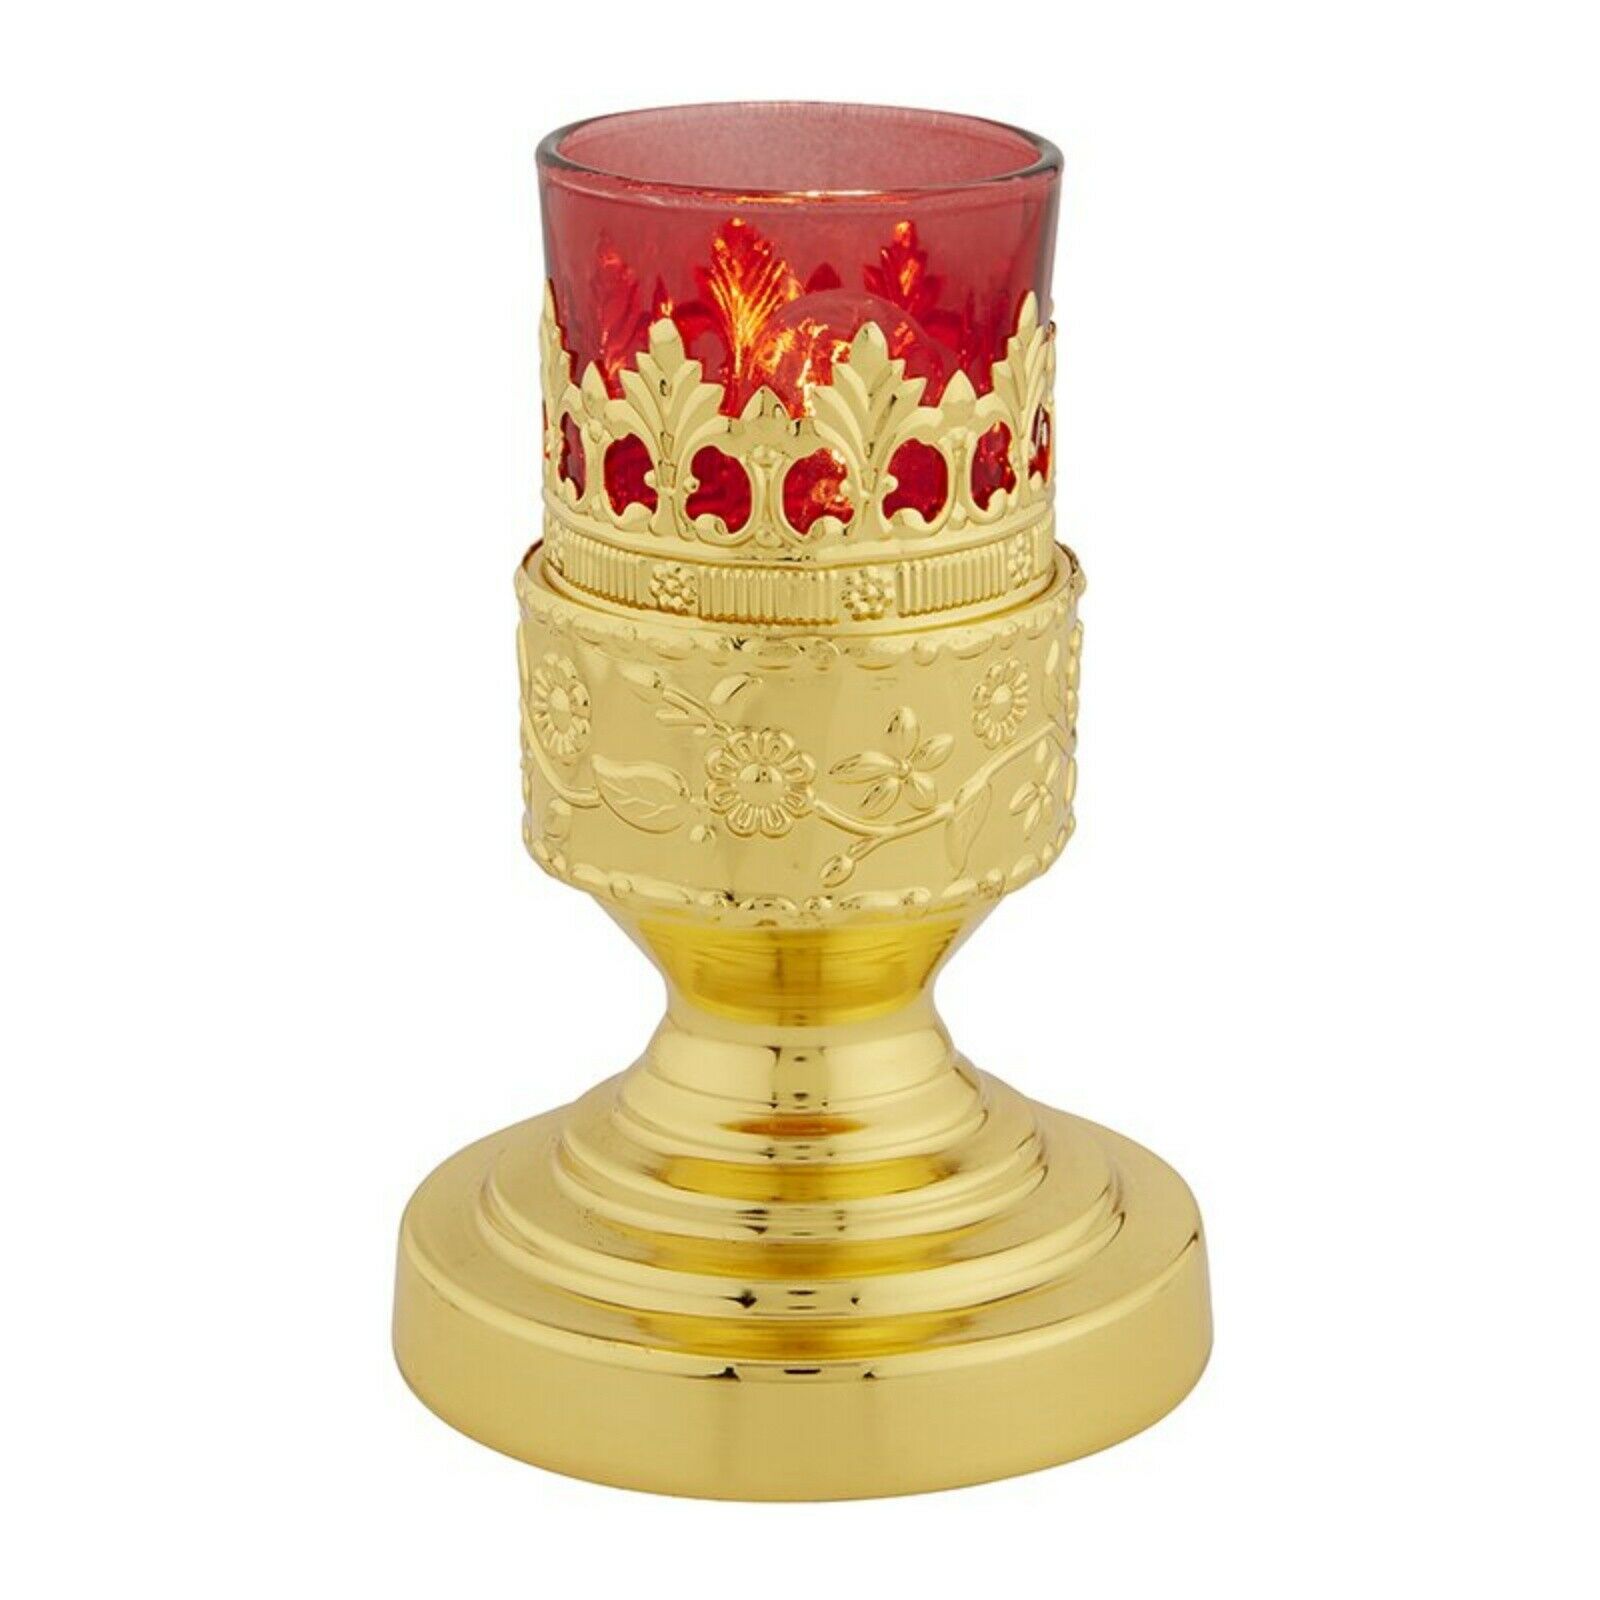 N.g. Table Standing Red Glass Electric Votive Candle For Church Supplies, 5 Inch